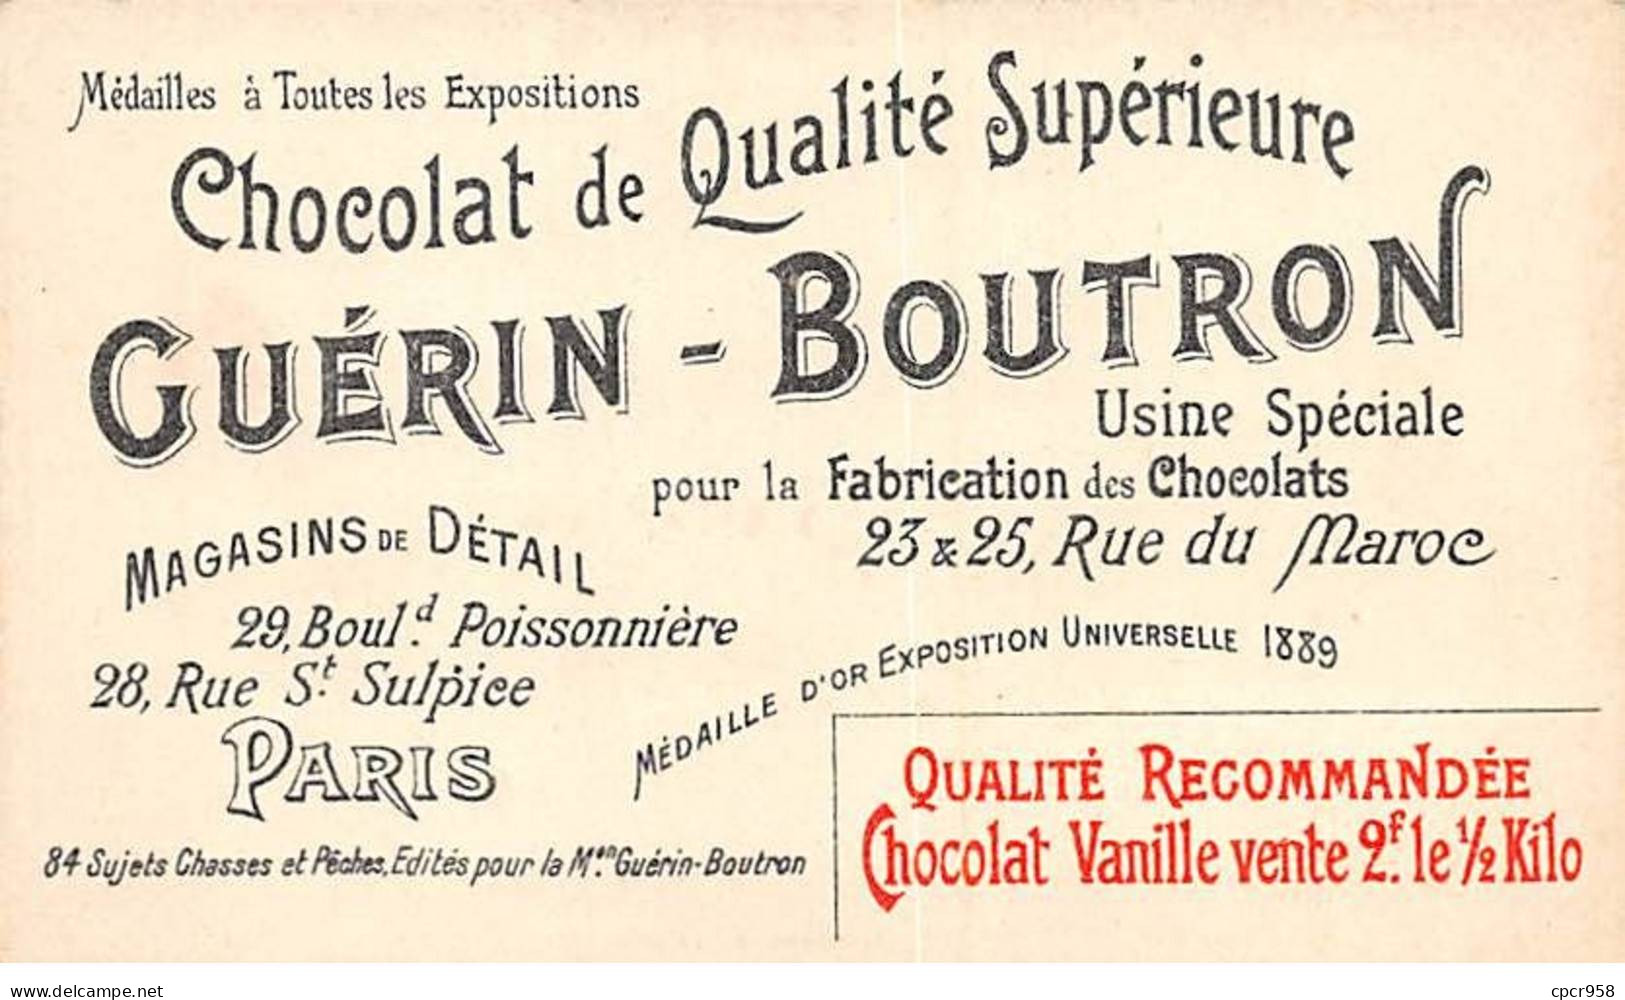 Chromos -COR10587 - Chocolat Guérin-Boutron- Chasses Et Pêches-Cailles- Chiens -Chasseurs  - 6x10 Cm Env. - Guérin-Boutron